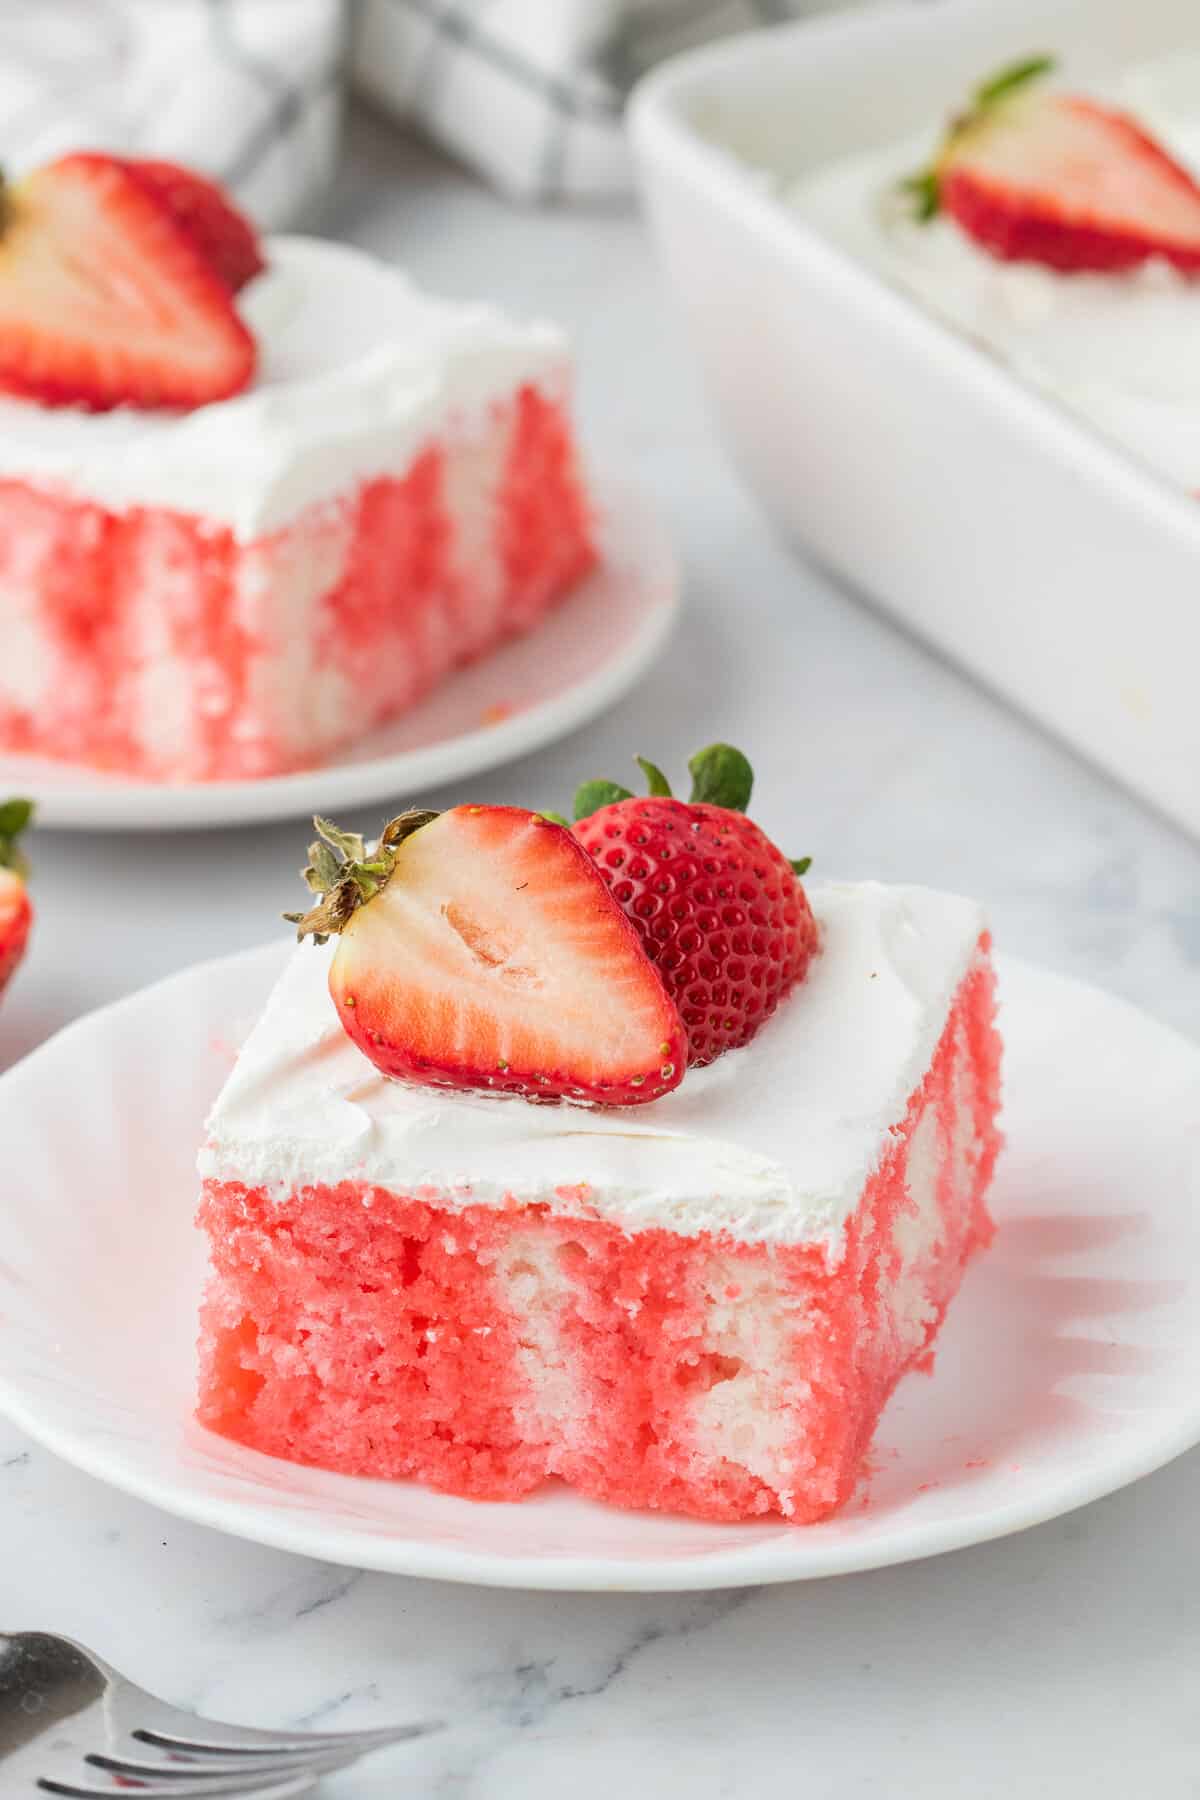 Strawberry jello poke cake topped with cool whip whipped topping and fresh strawberries and served on white plates.